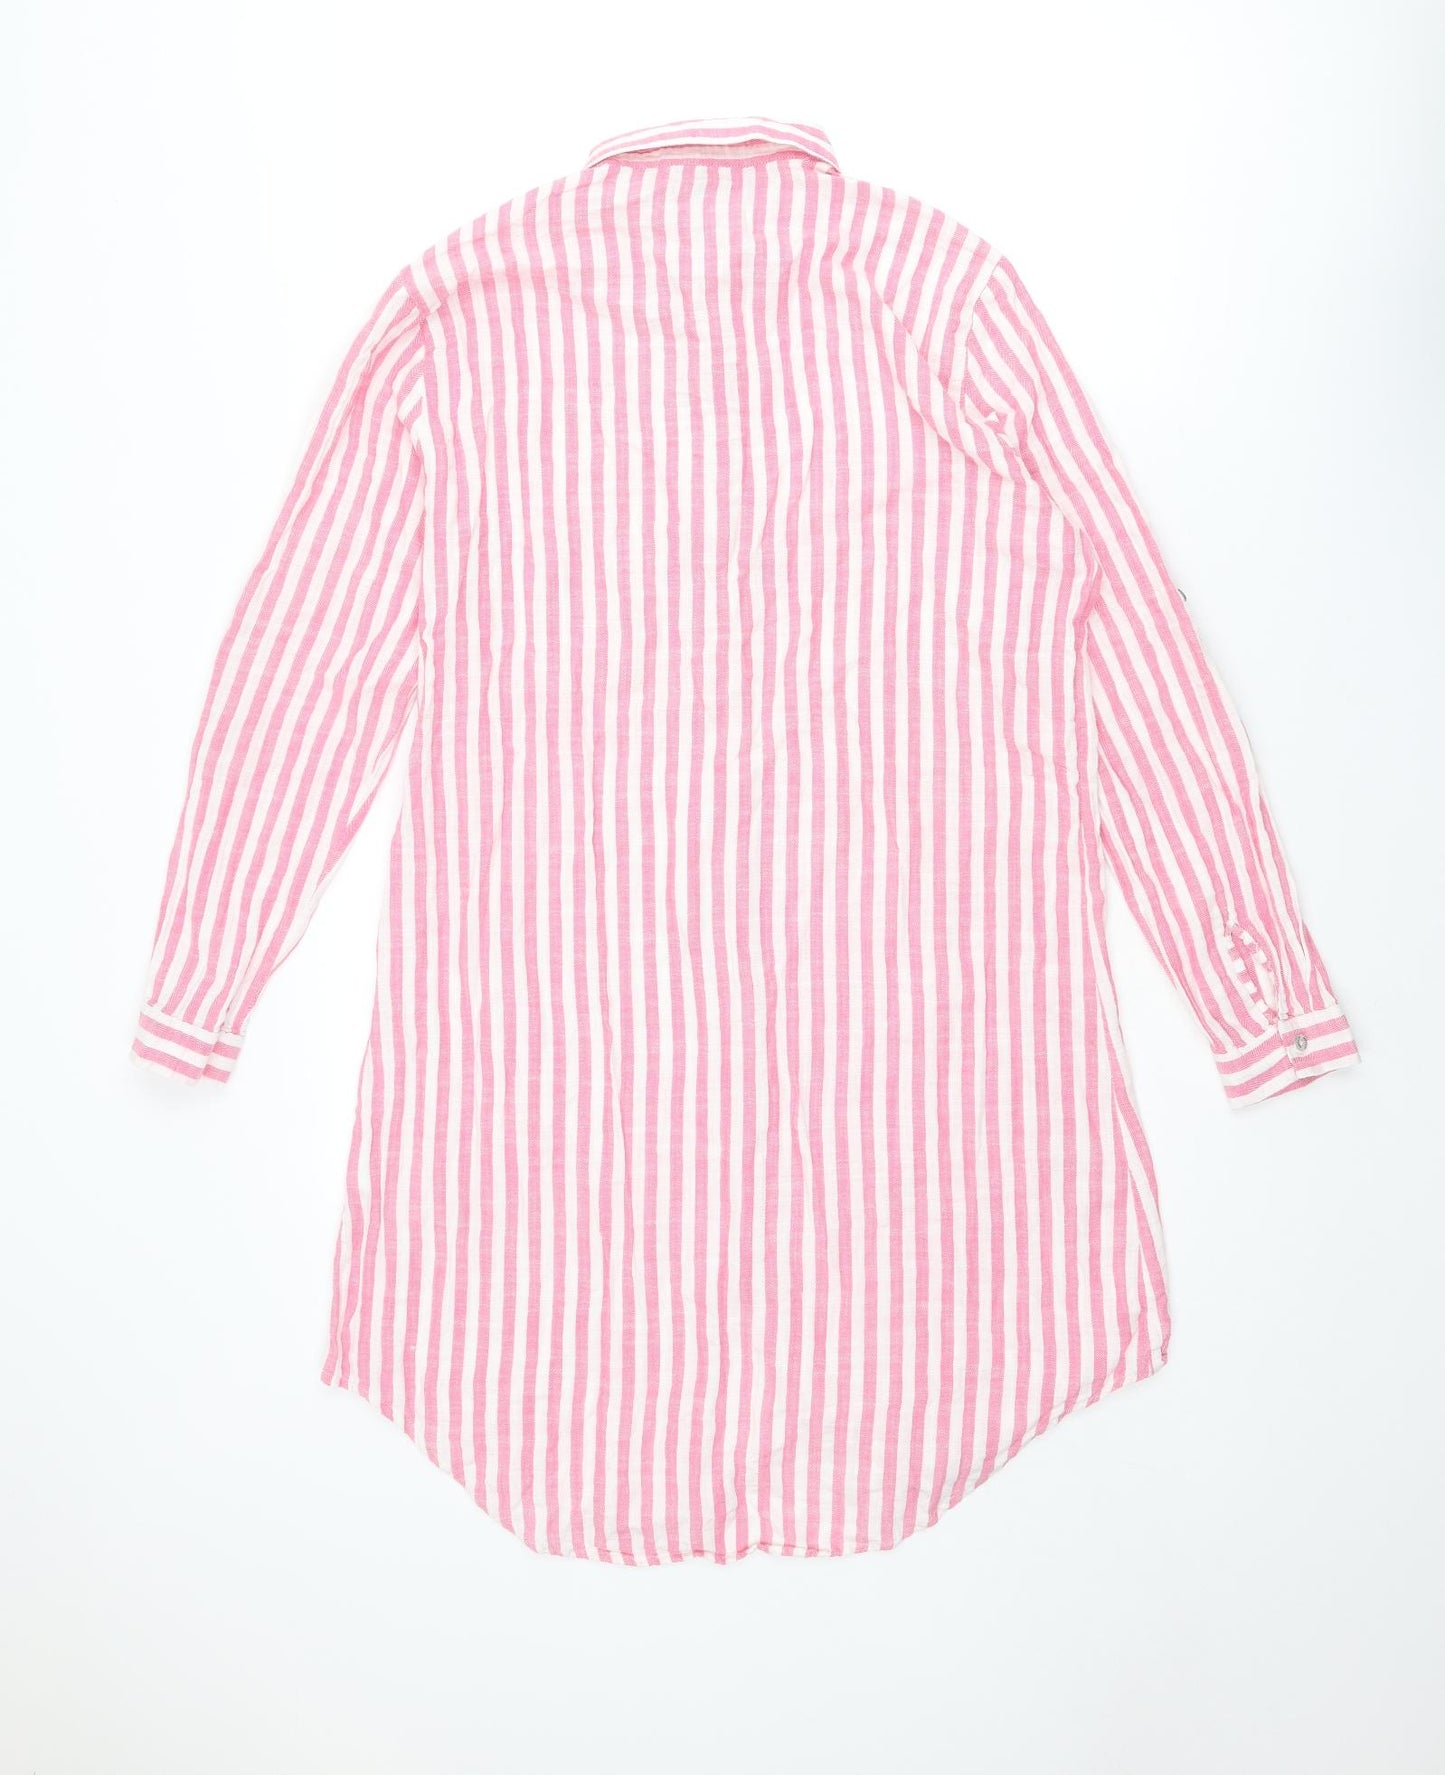 My.POLO X Womens Pink Striped Cotton Shirt Dress Size M Collared Button